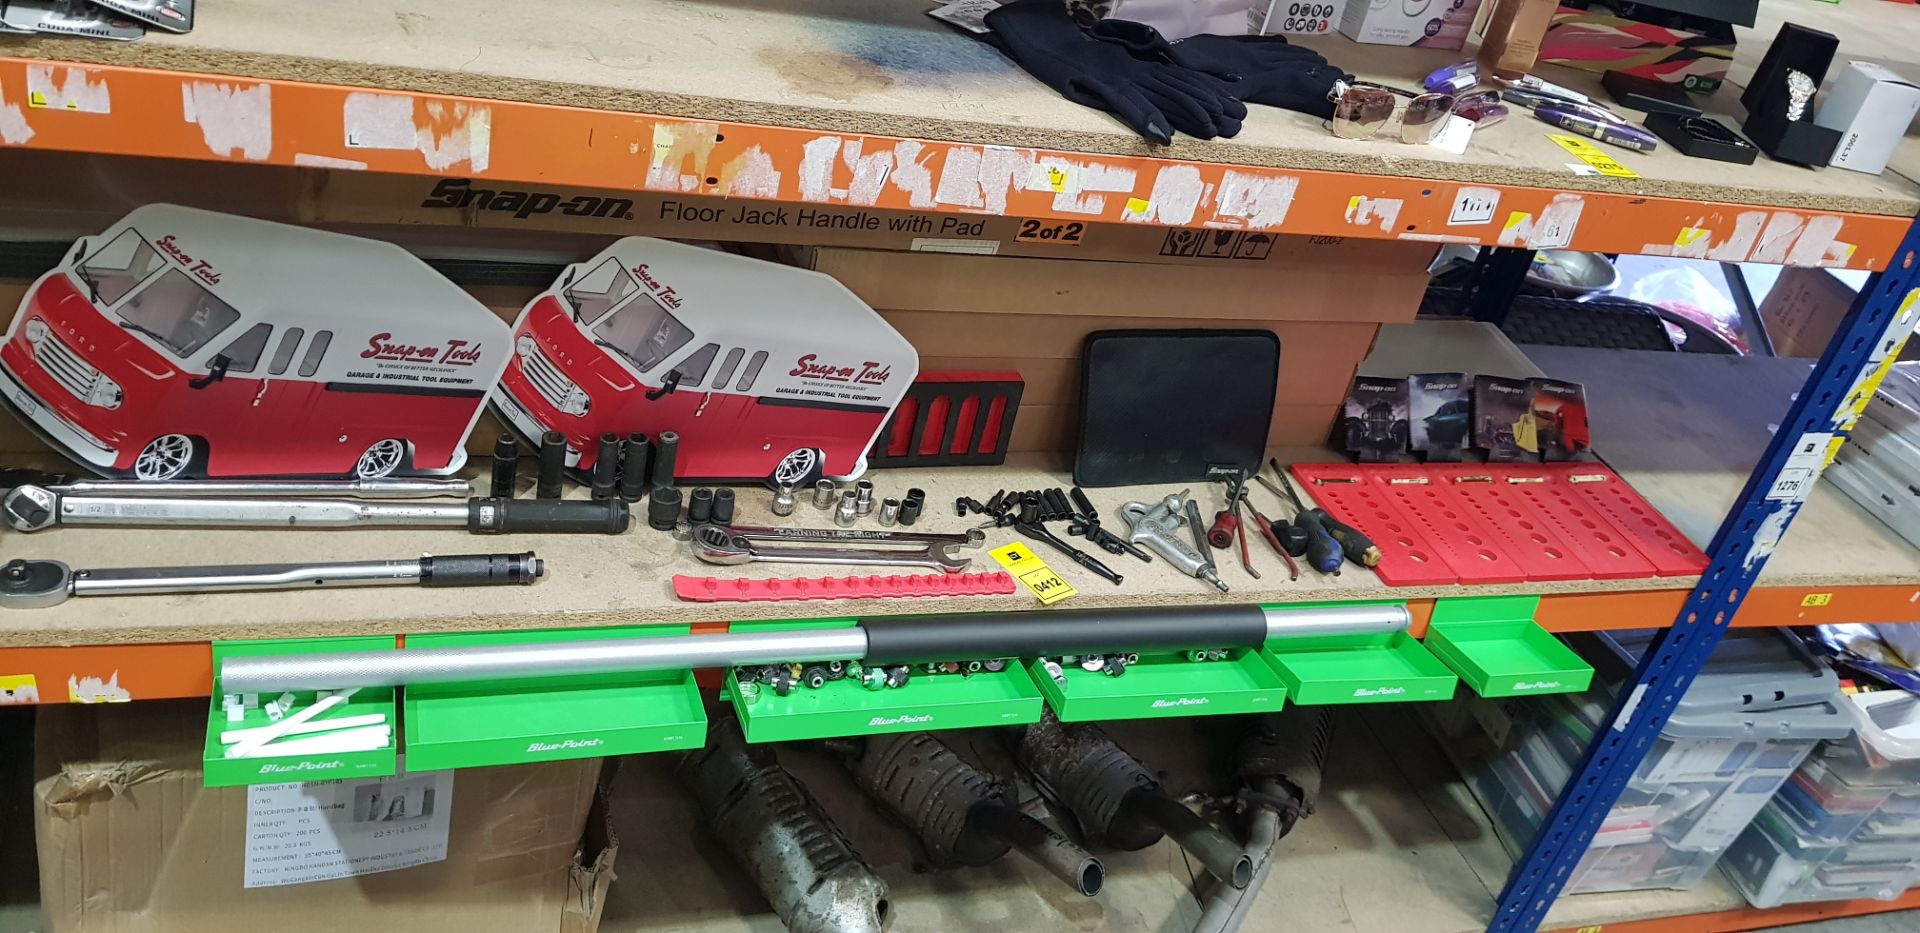 FULL SHELF MIXED TOOL LOT CONTAINING SEALEY TORQUE WRENCH / DINABETA TORQUE WRENCH / IMPACT